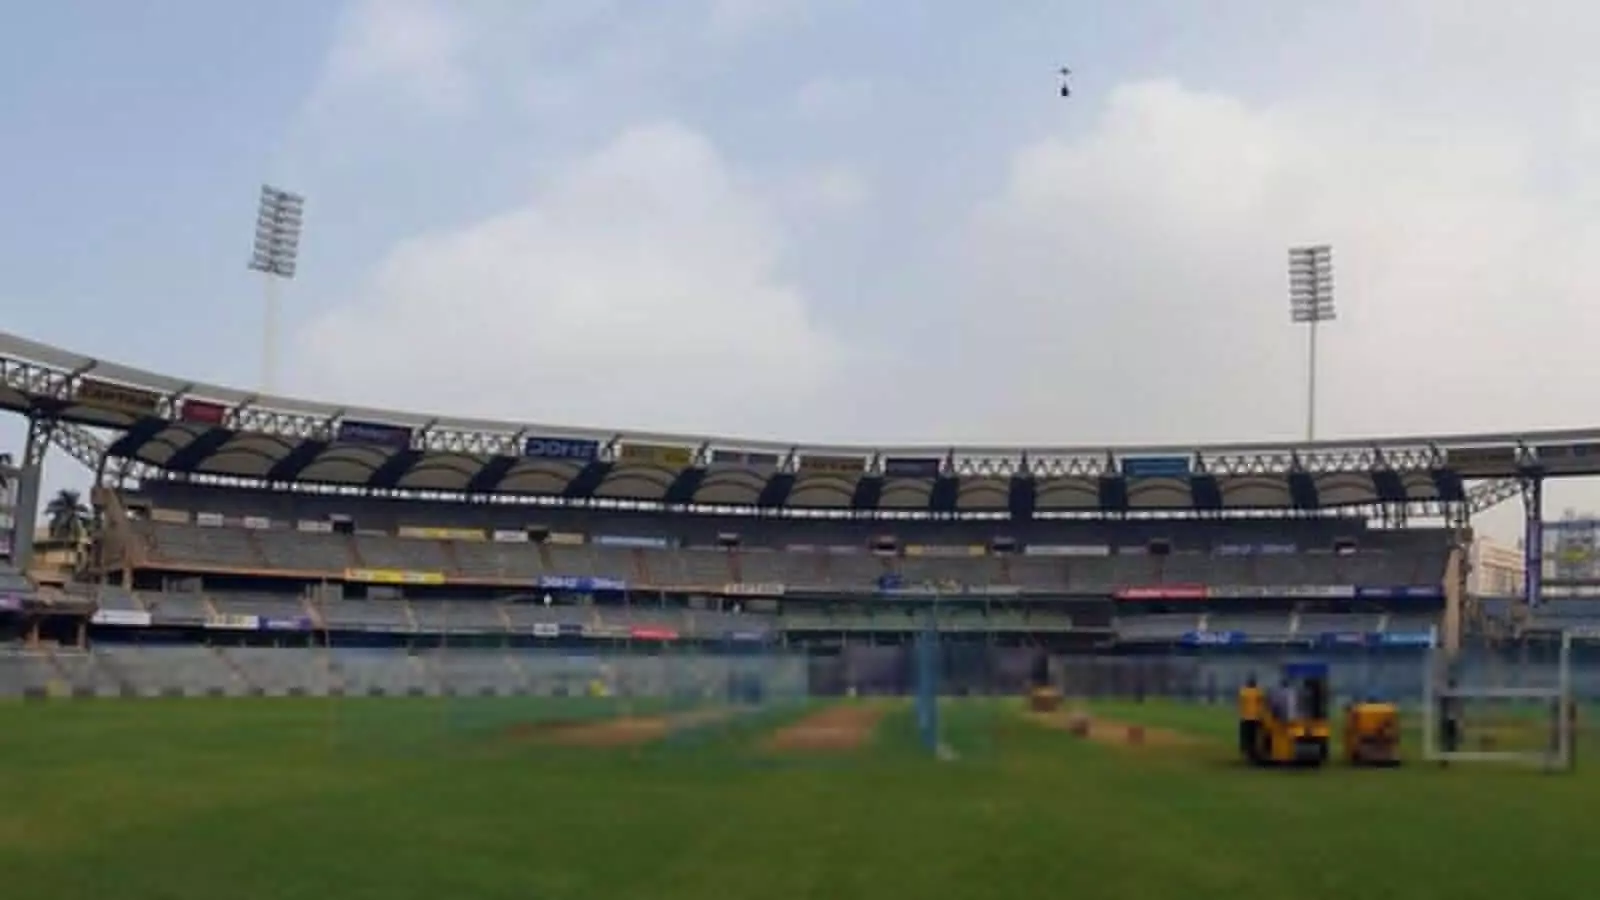 Week before IPL, Wankhede Stadium groundstaff tests positive for COVID-19